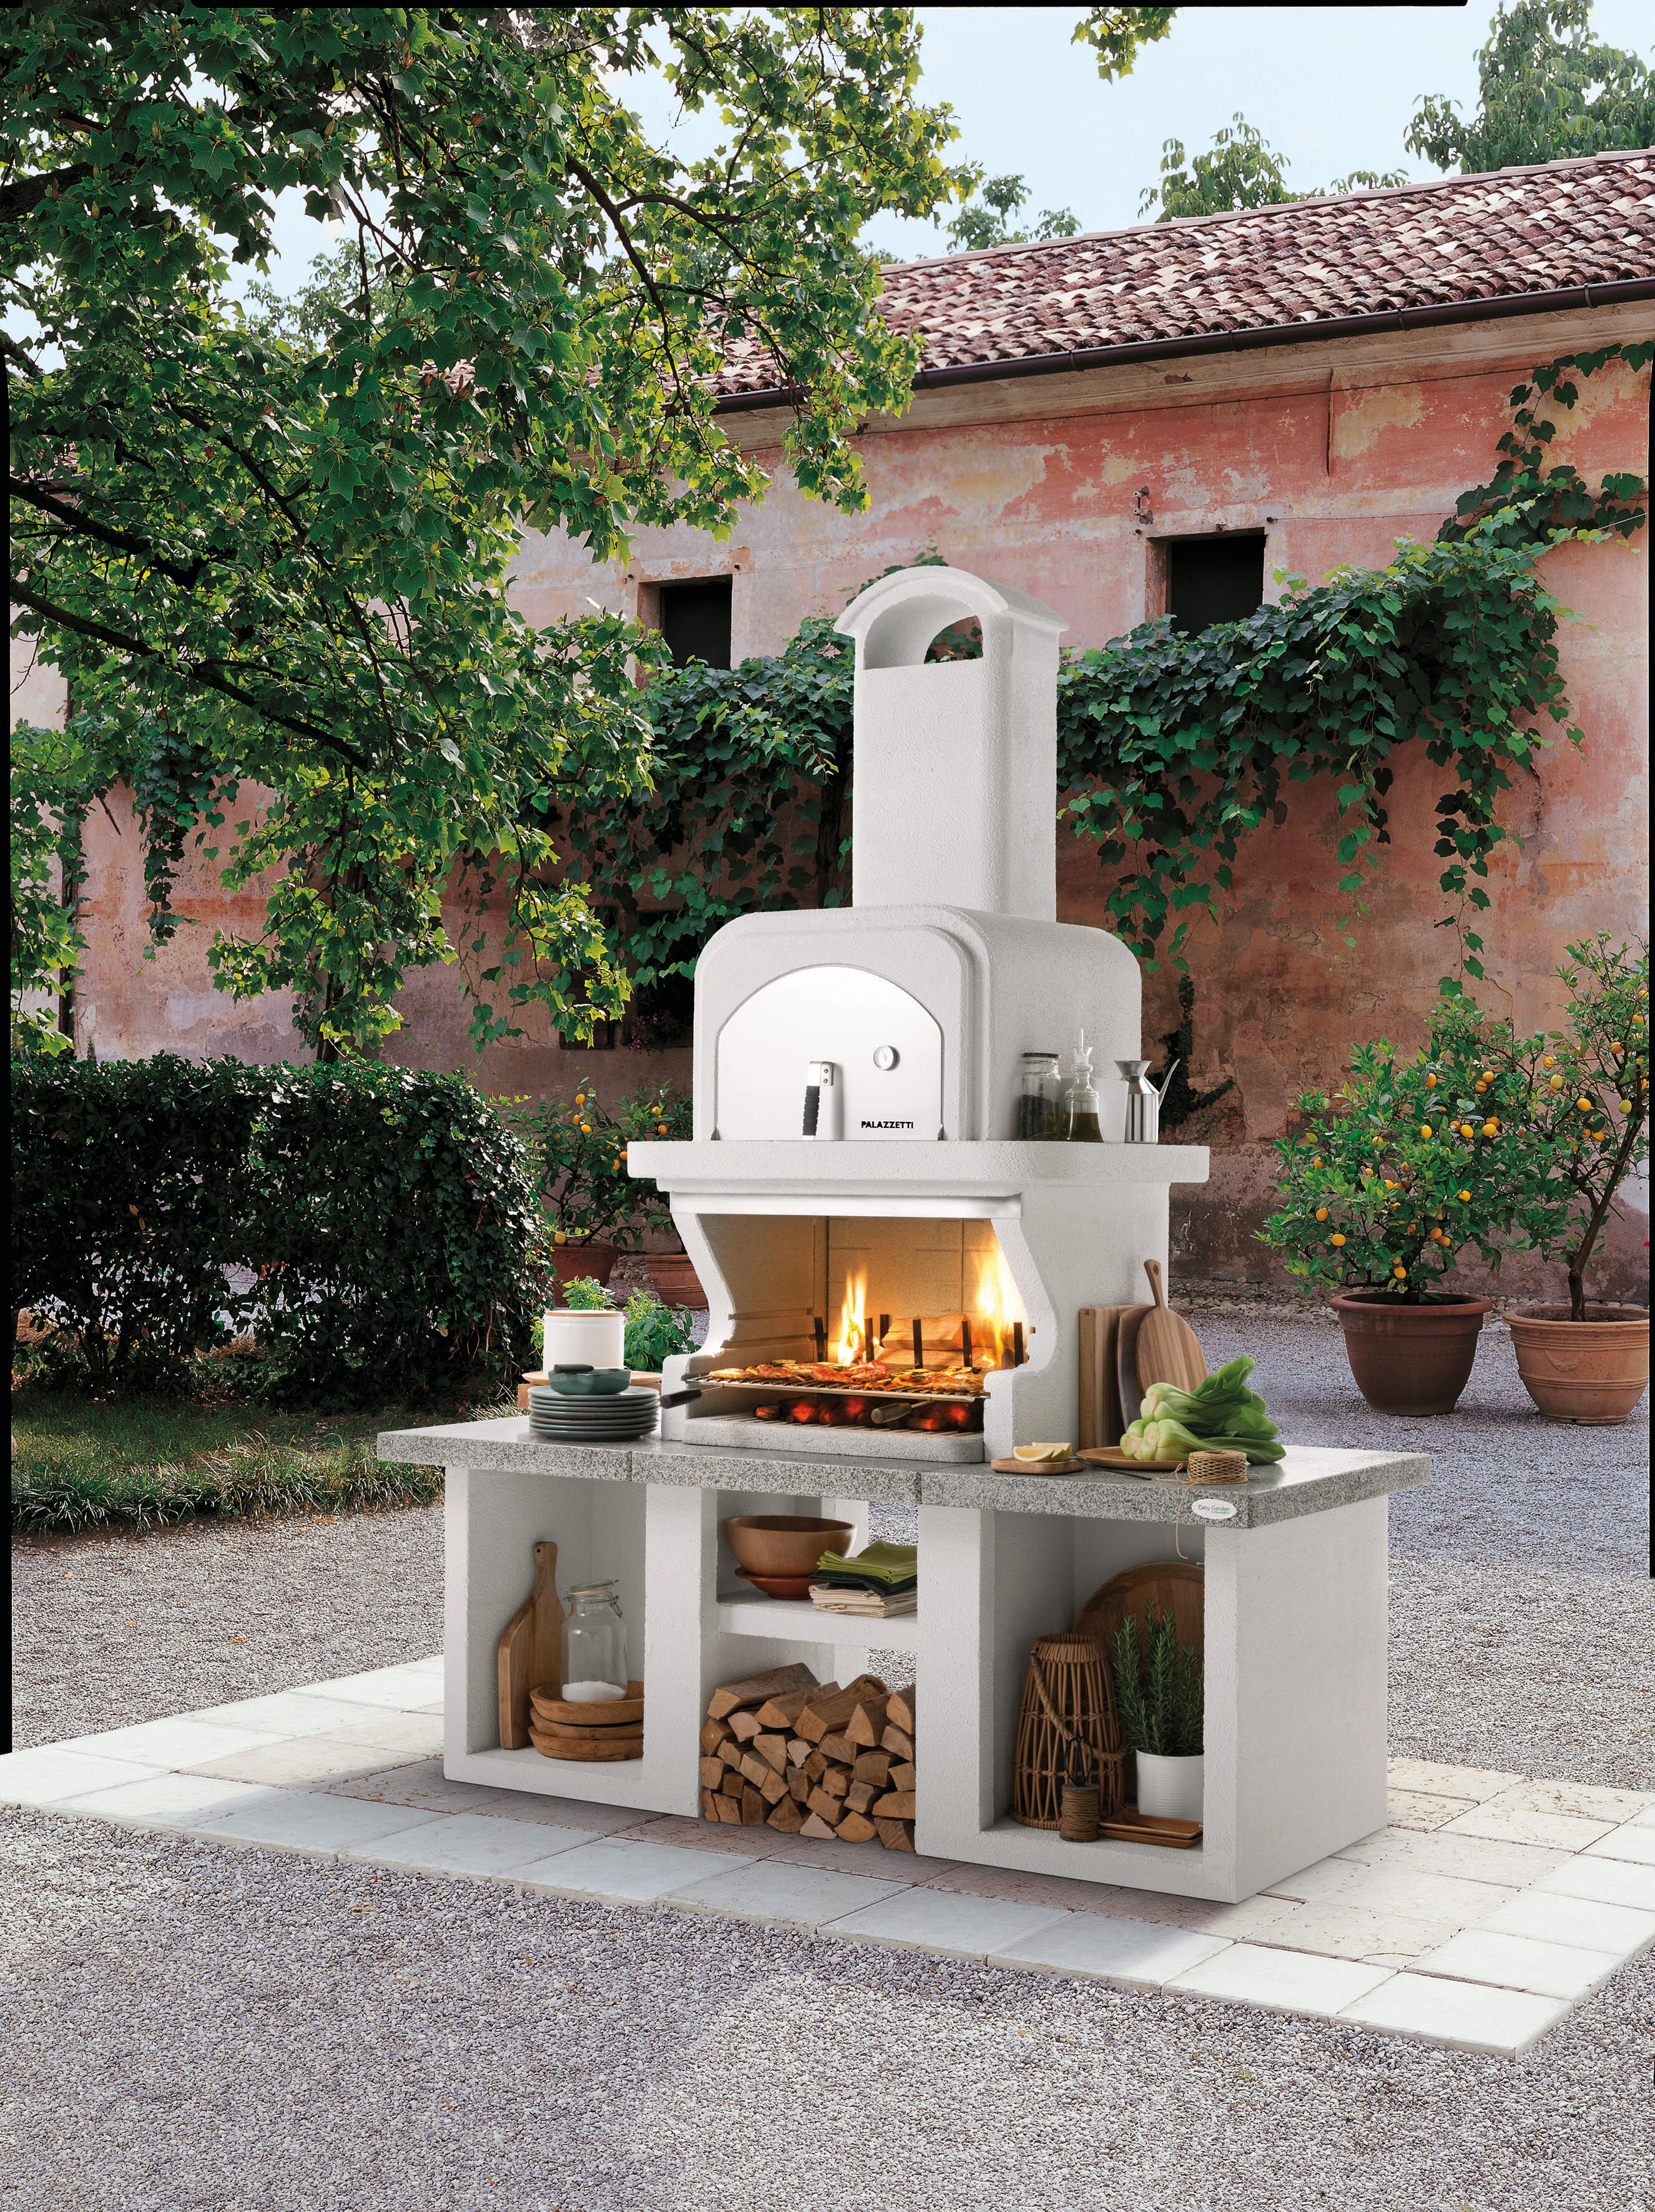 Barbecue fixe avec four inox Pamplona Easy Garden by Palazzetti